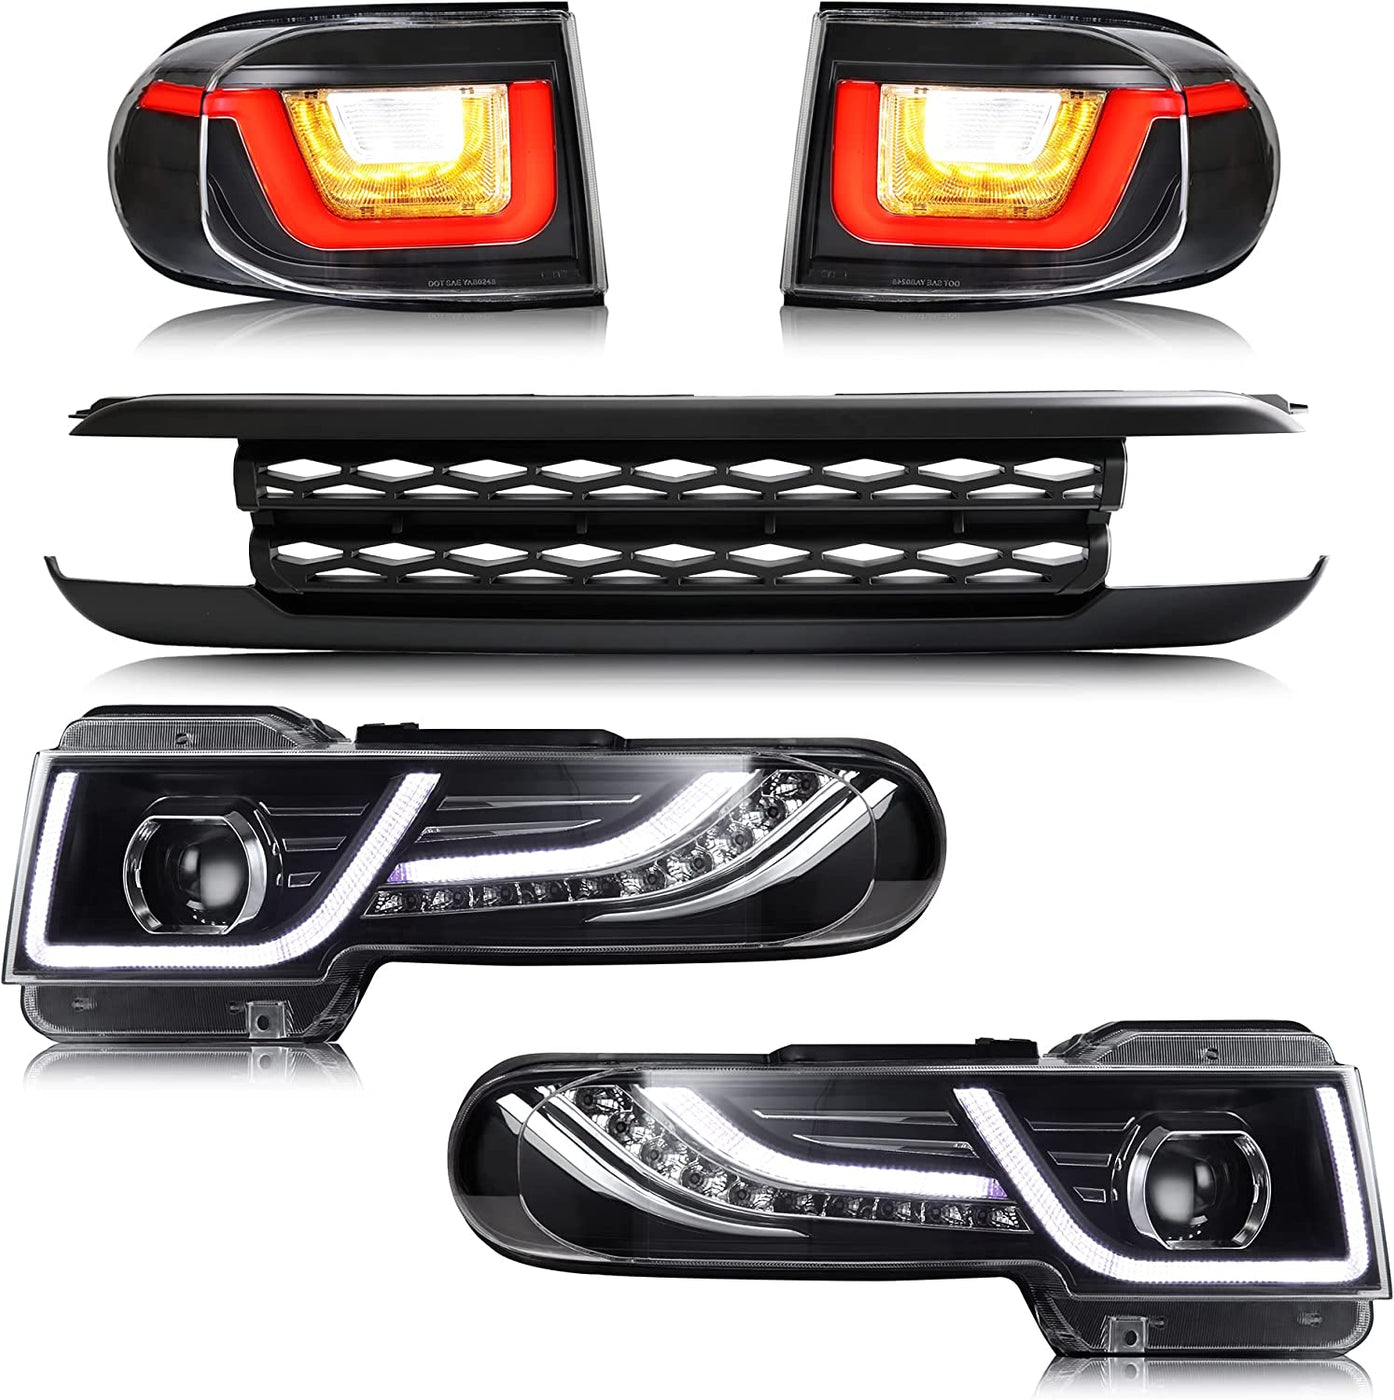 Vland Led Taillights And Headlights With Grille For Toyota Fj Cruiser